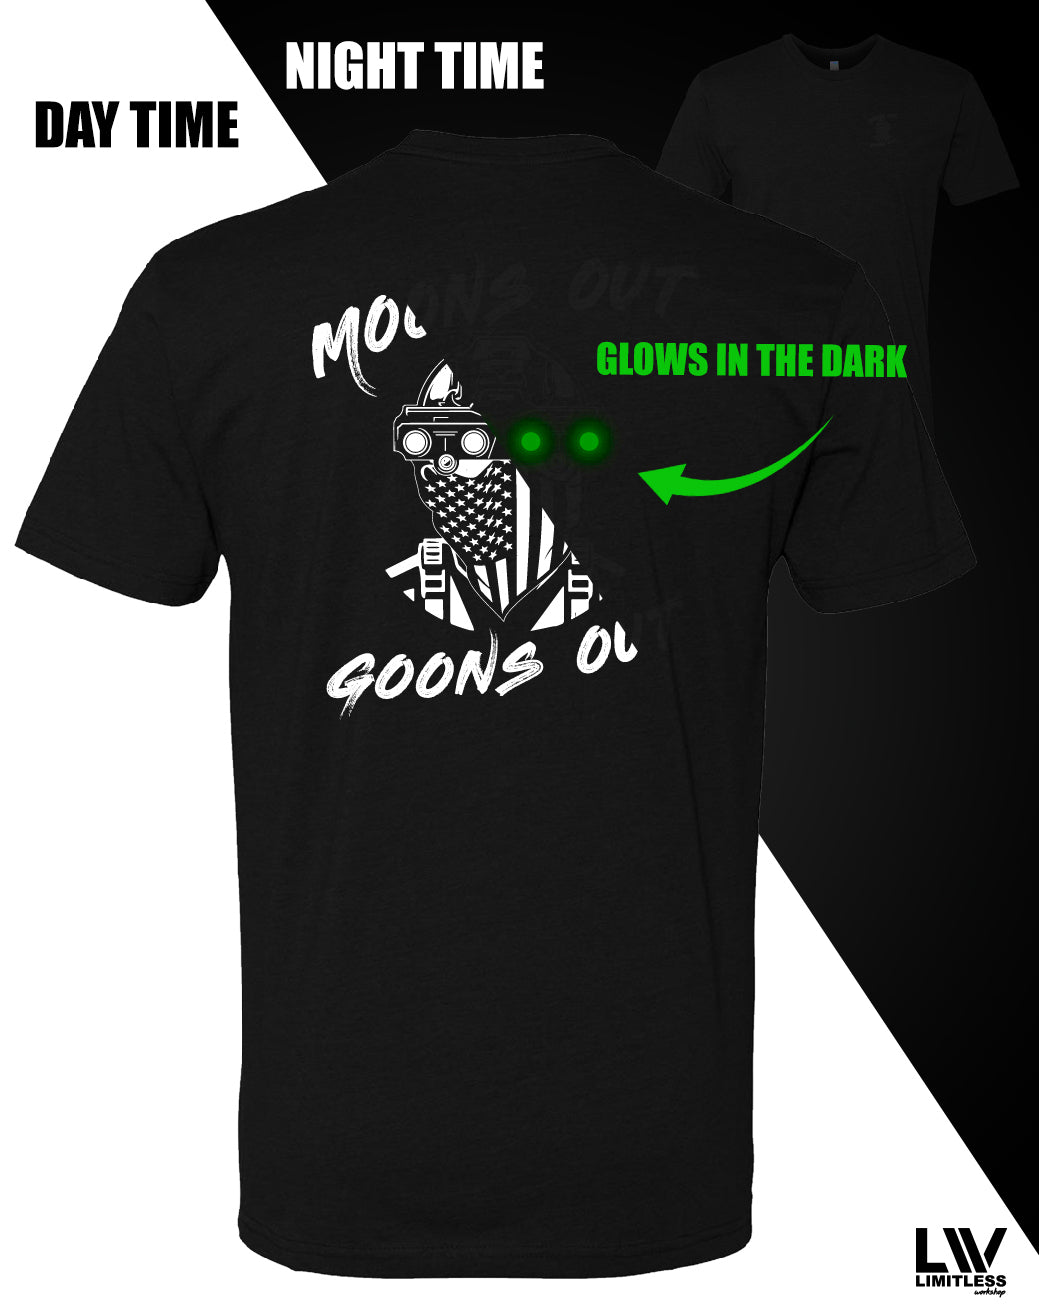 Moons Outs, Goons Outs T-Shirt